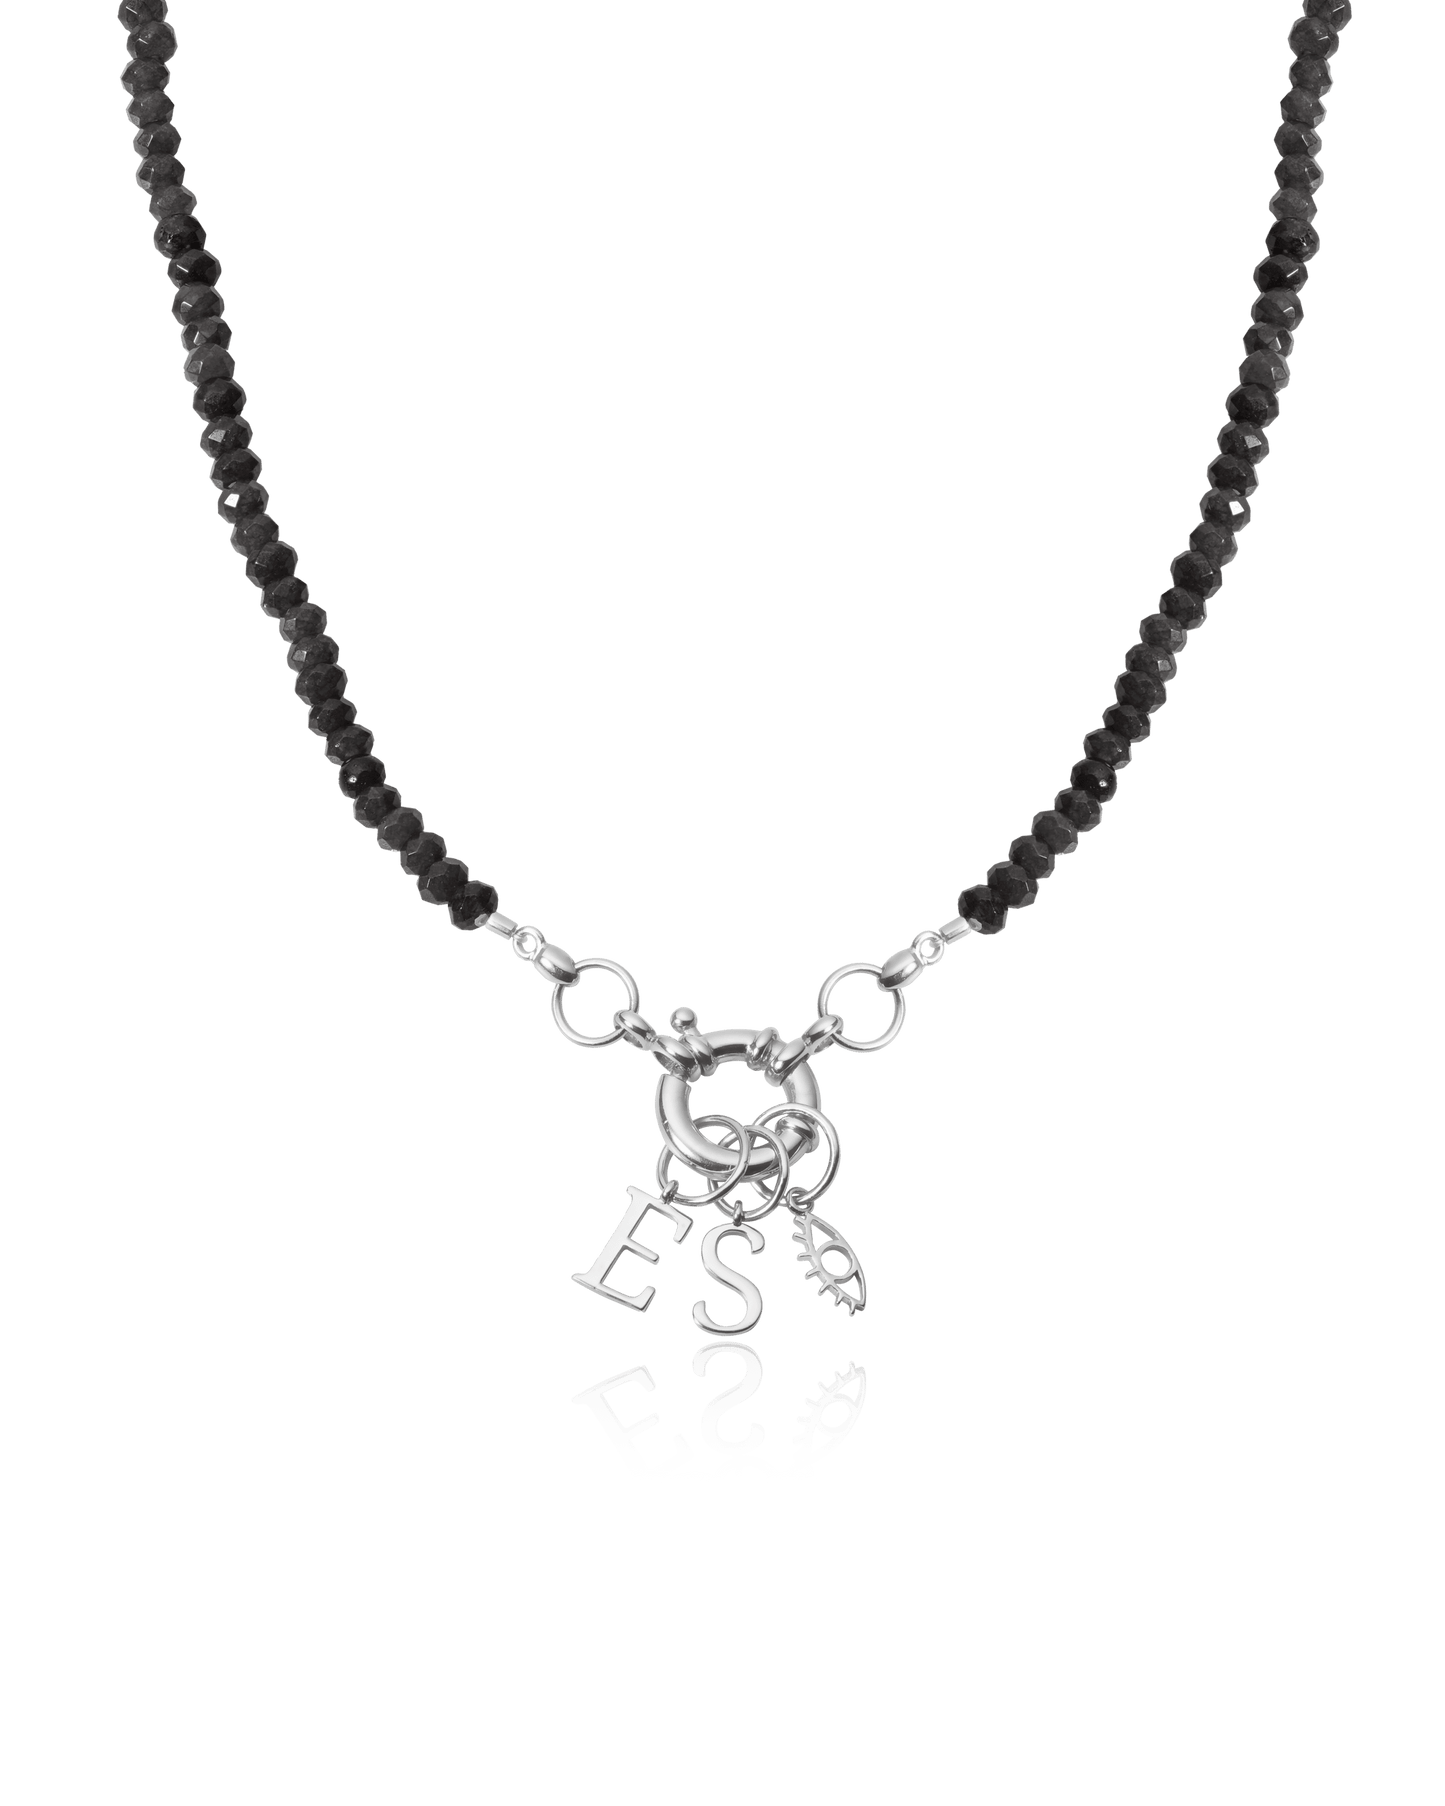 Green Jade Charm Lock Necklace - 925 Sterling Silver Necklaces magal-dev Glass Beads Black Spinnel 1 Charm 16"